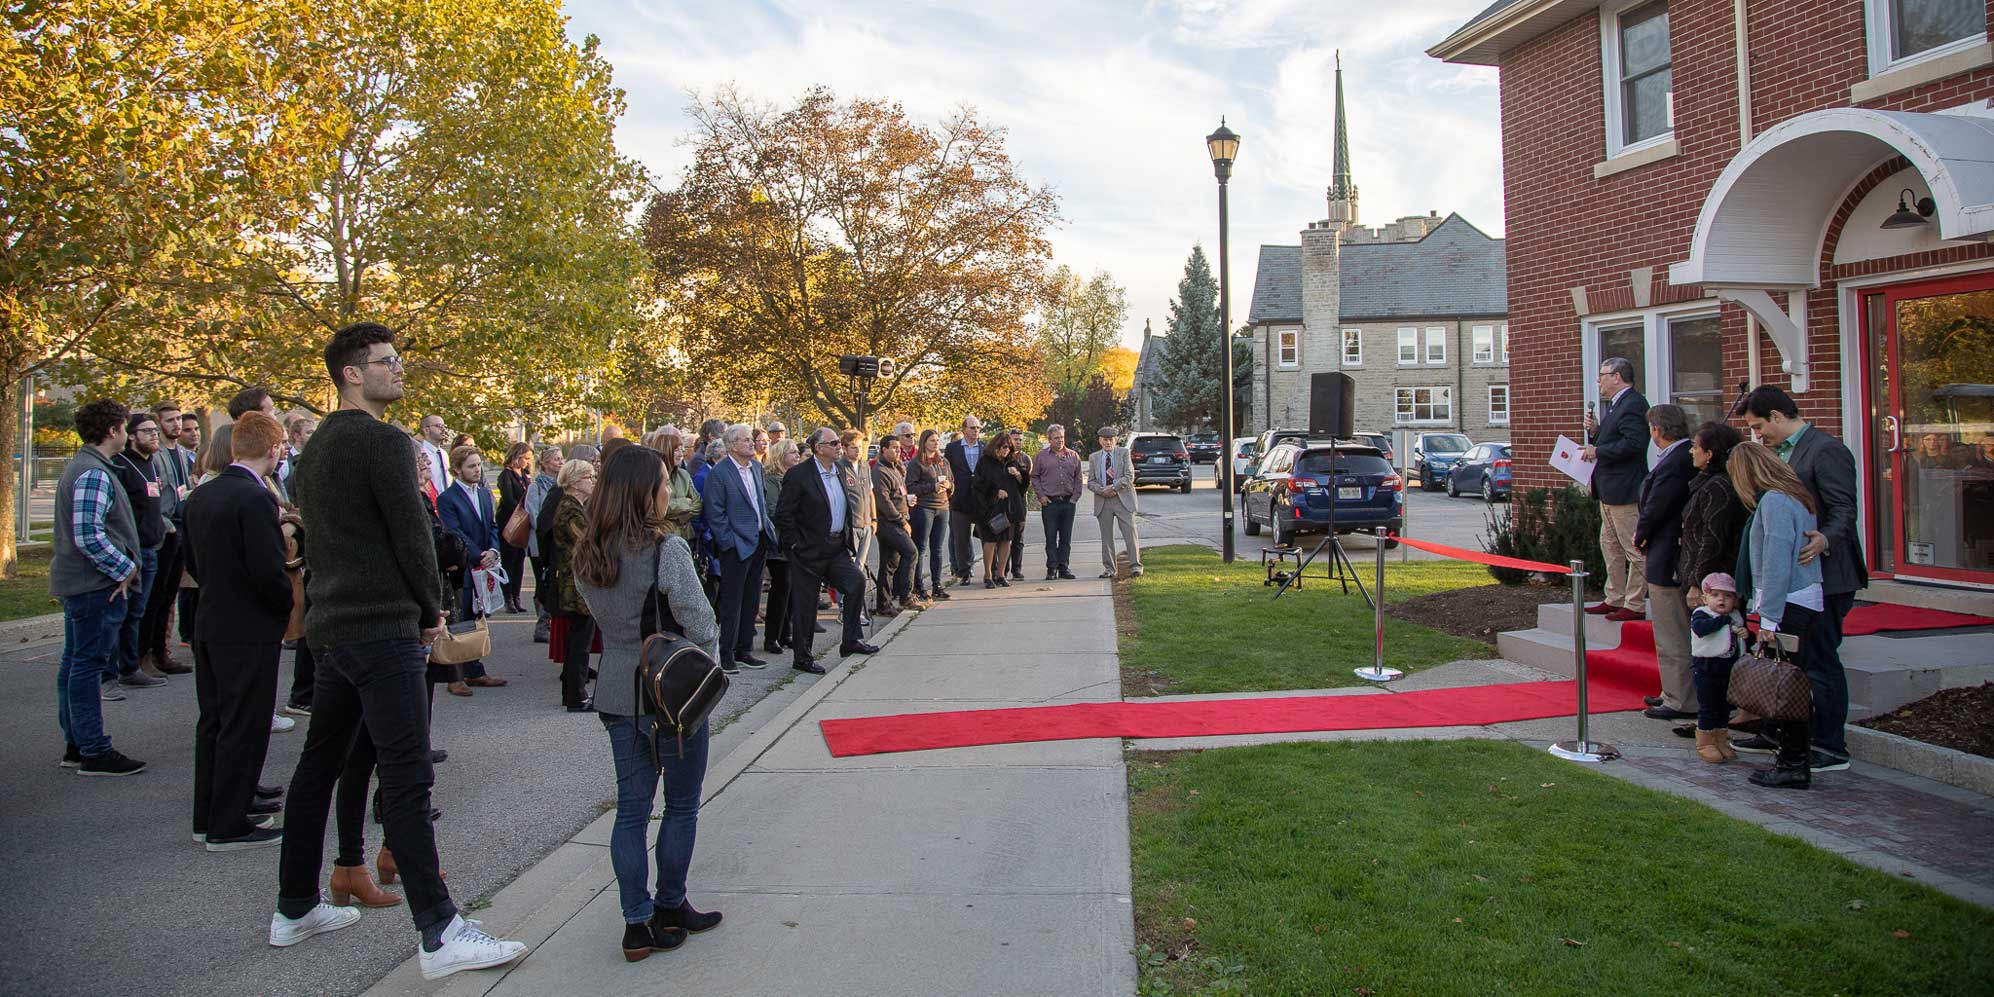 Huron at Western University celebrates the revitalization of two Heritage properties on Western Road